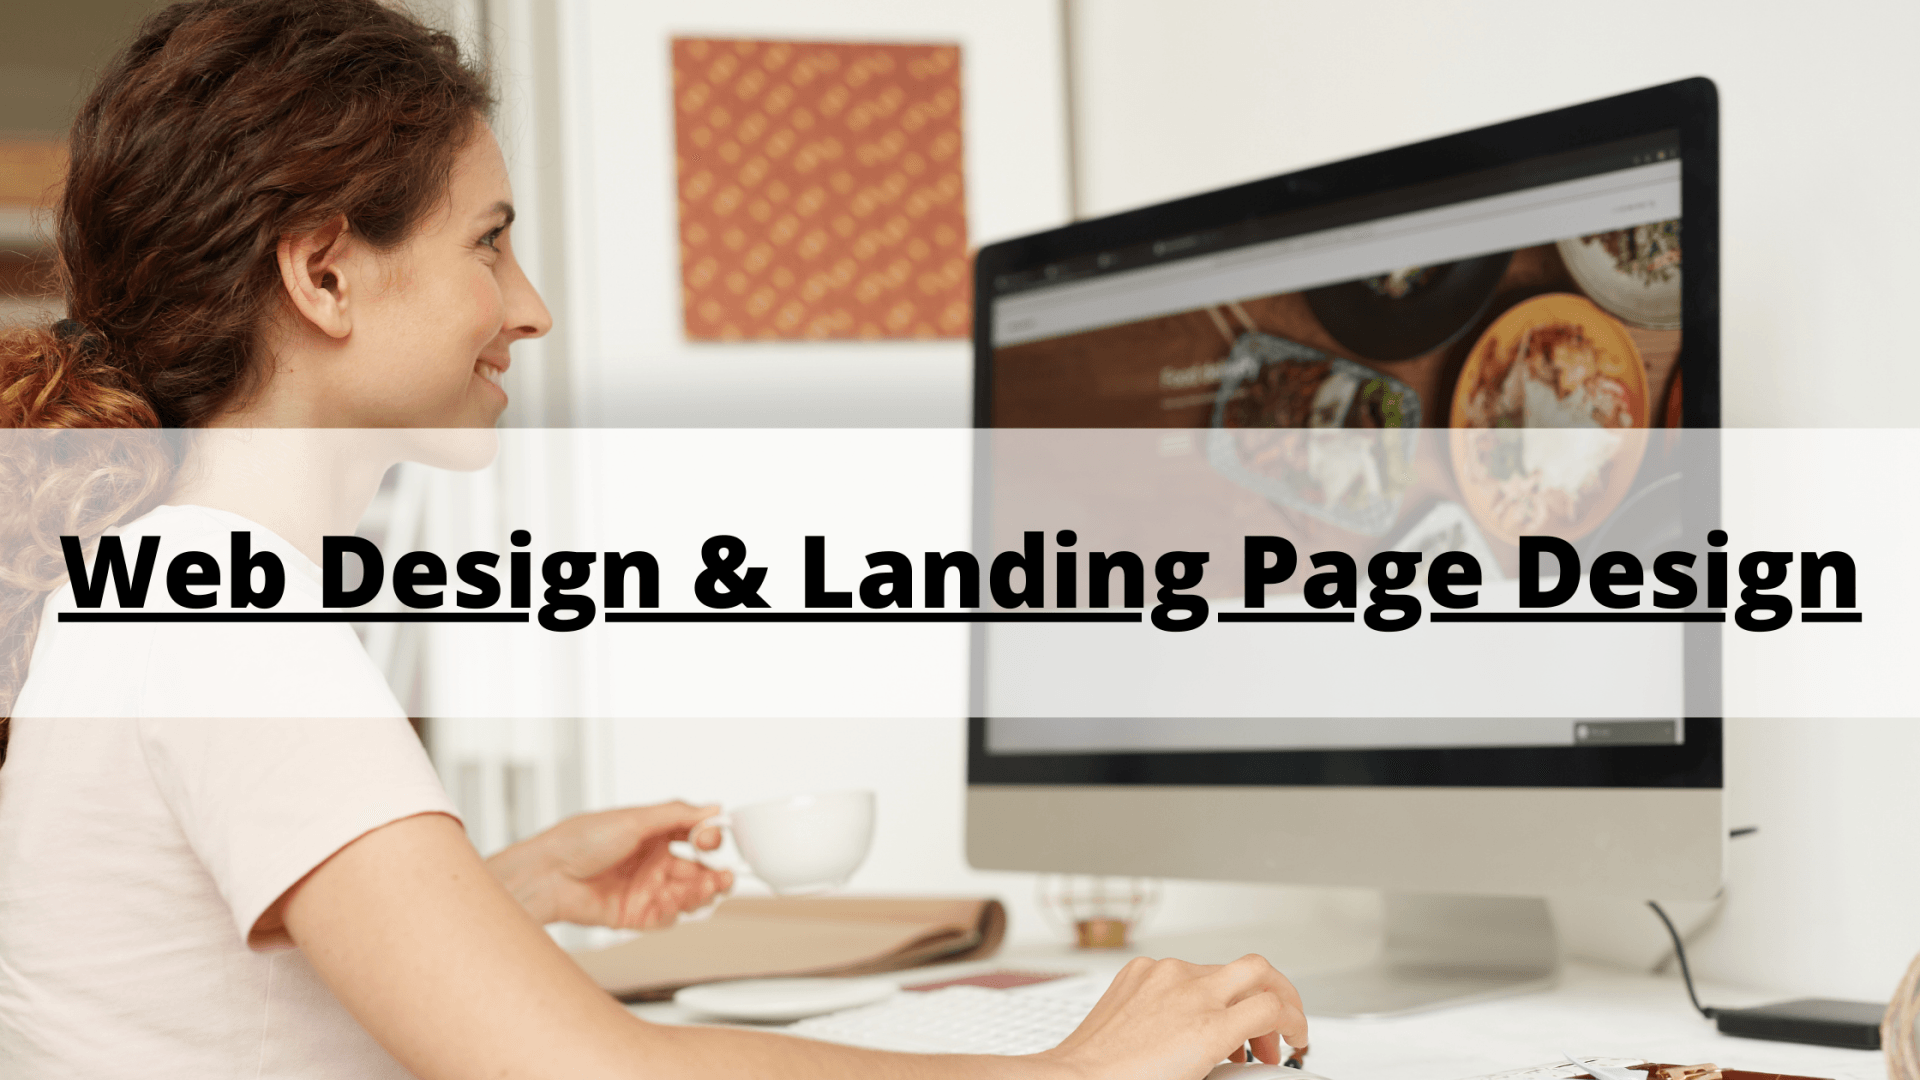 the first area of the most in demand is freelance is web design and landing page design